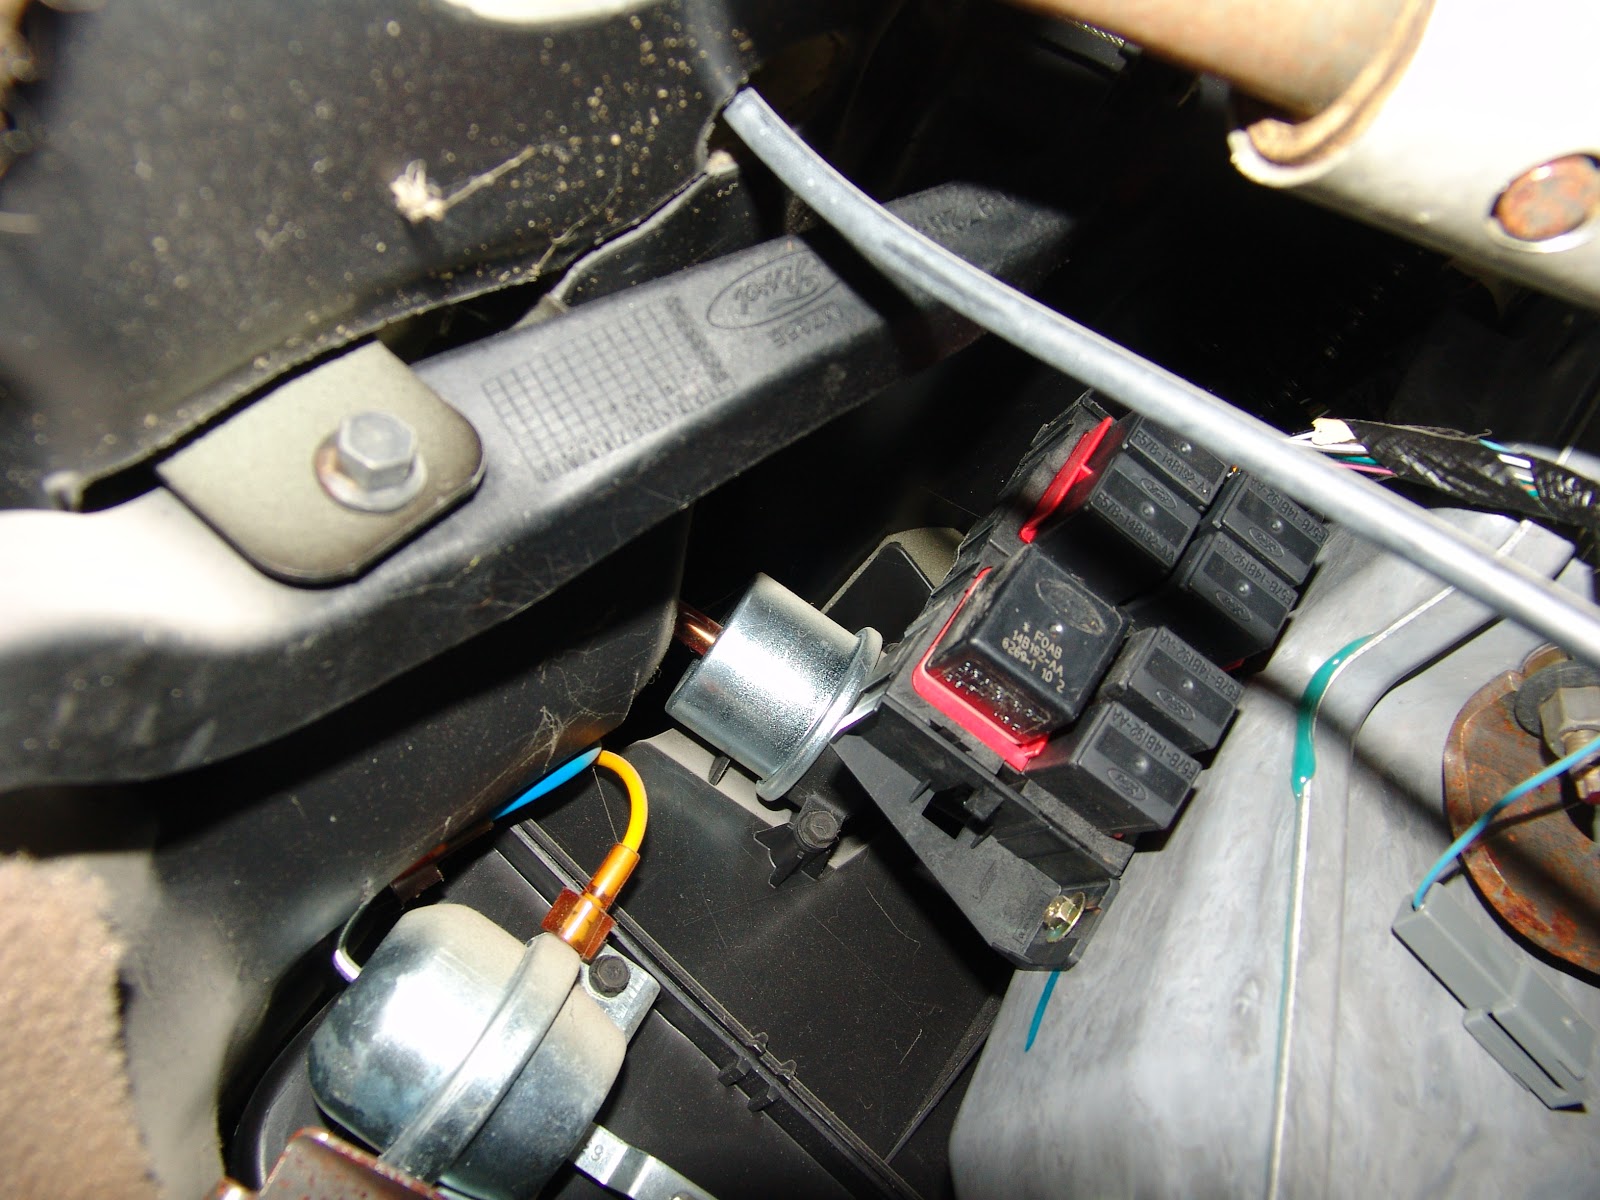 1997 Ford explorer battery saver relay location